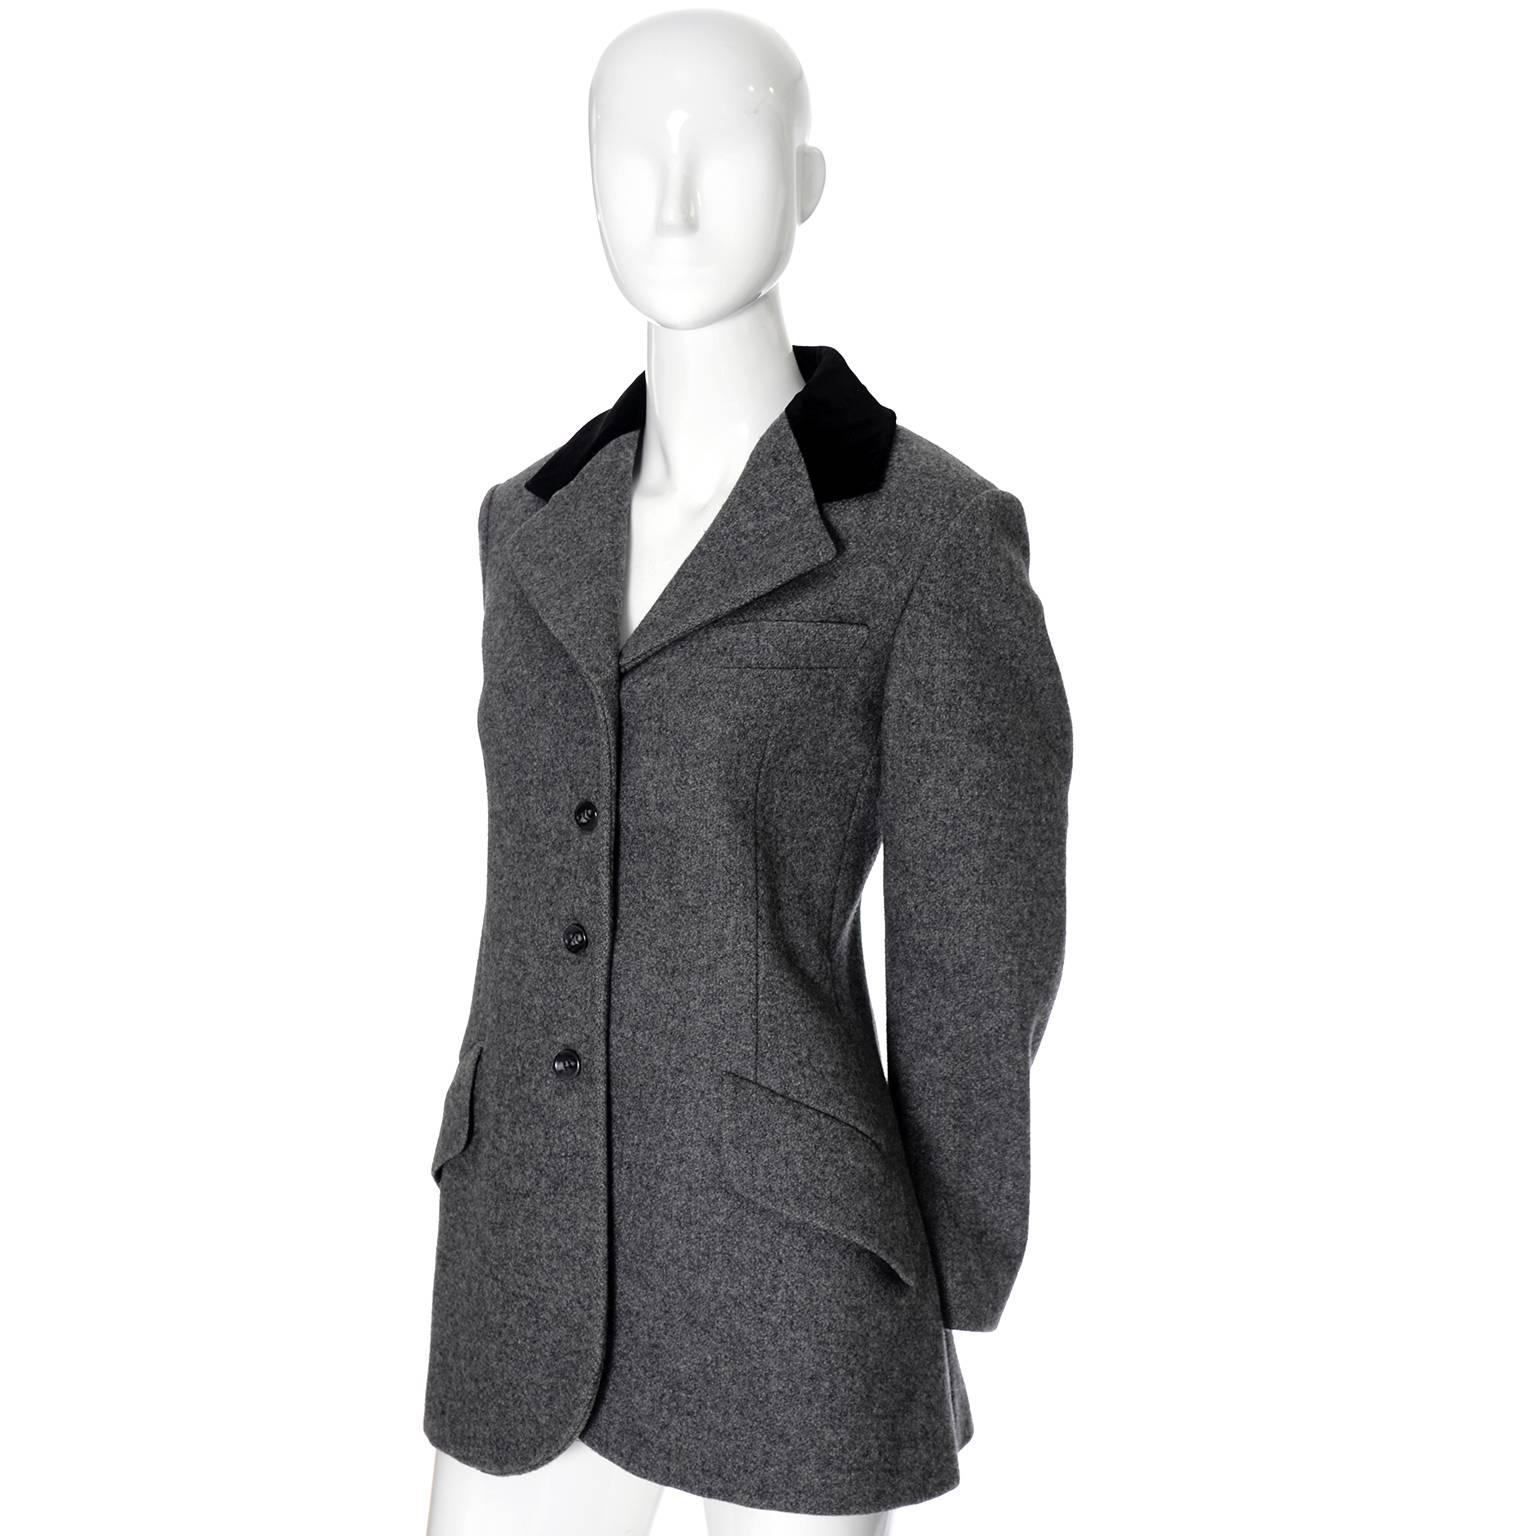 This is a gray wool vintage equestrian style blazer with velvet trim from Anne Klein. This jacket was purchased at the Anne Klein Corner of Saks Fifth Avenue in the 1970's and it is in excellent, as new condition.  The blazer has front lapel and two